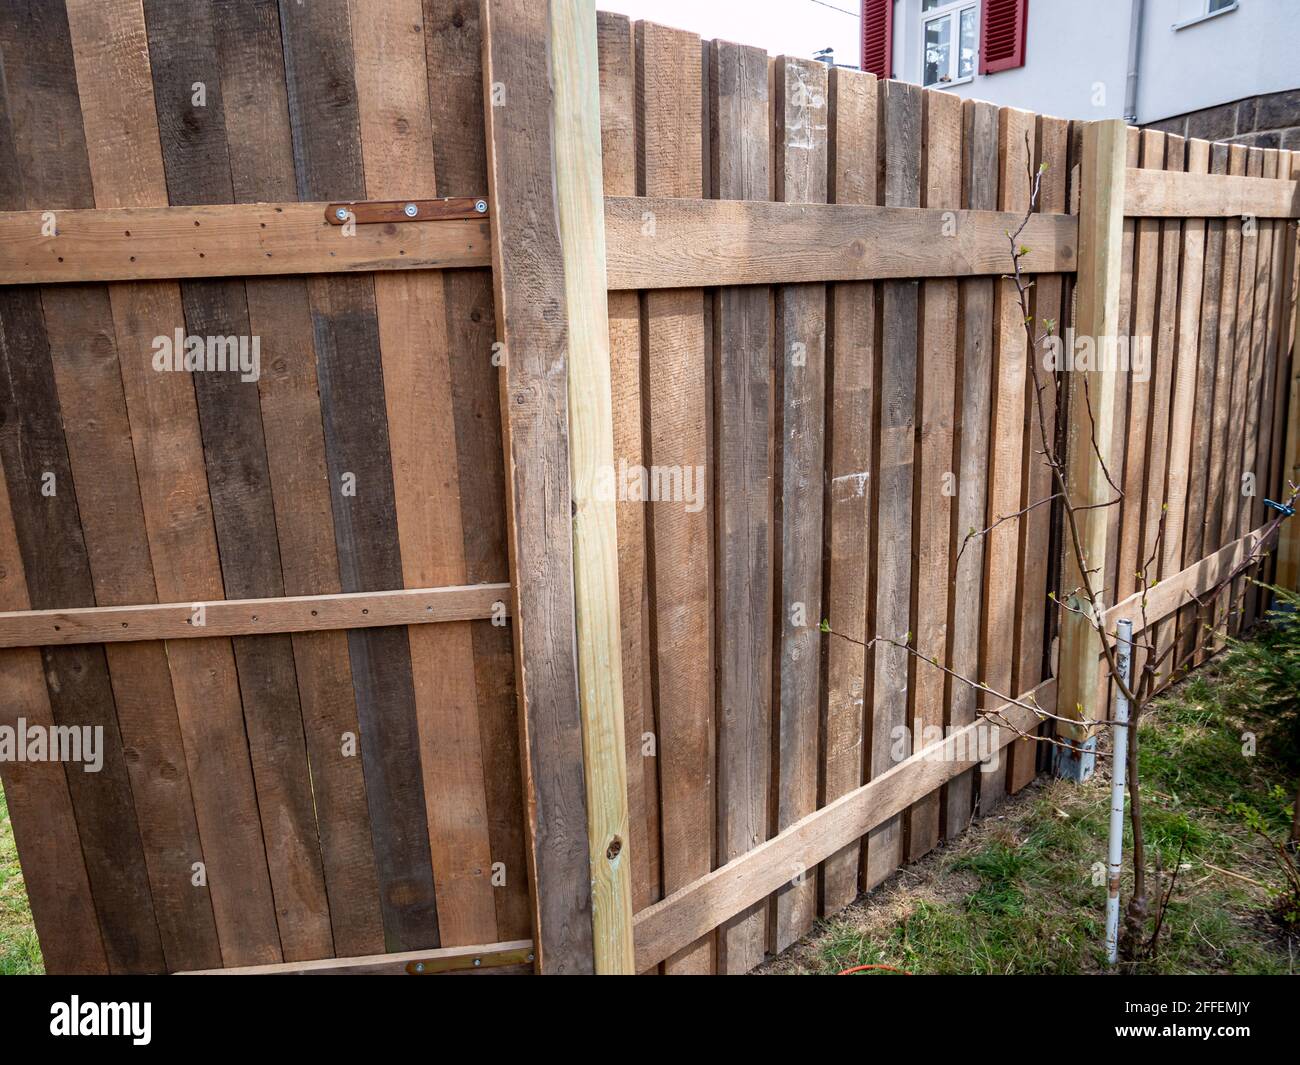 New fence is being built in the garden Stock Photo